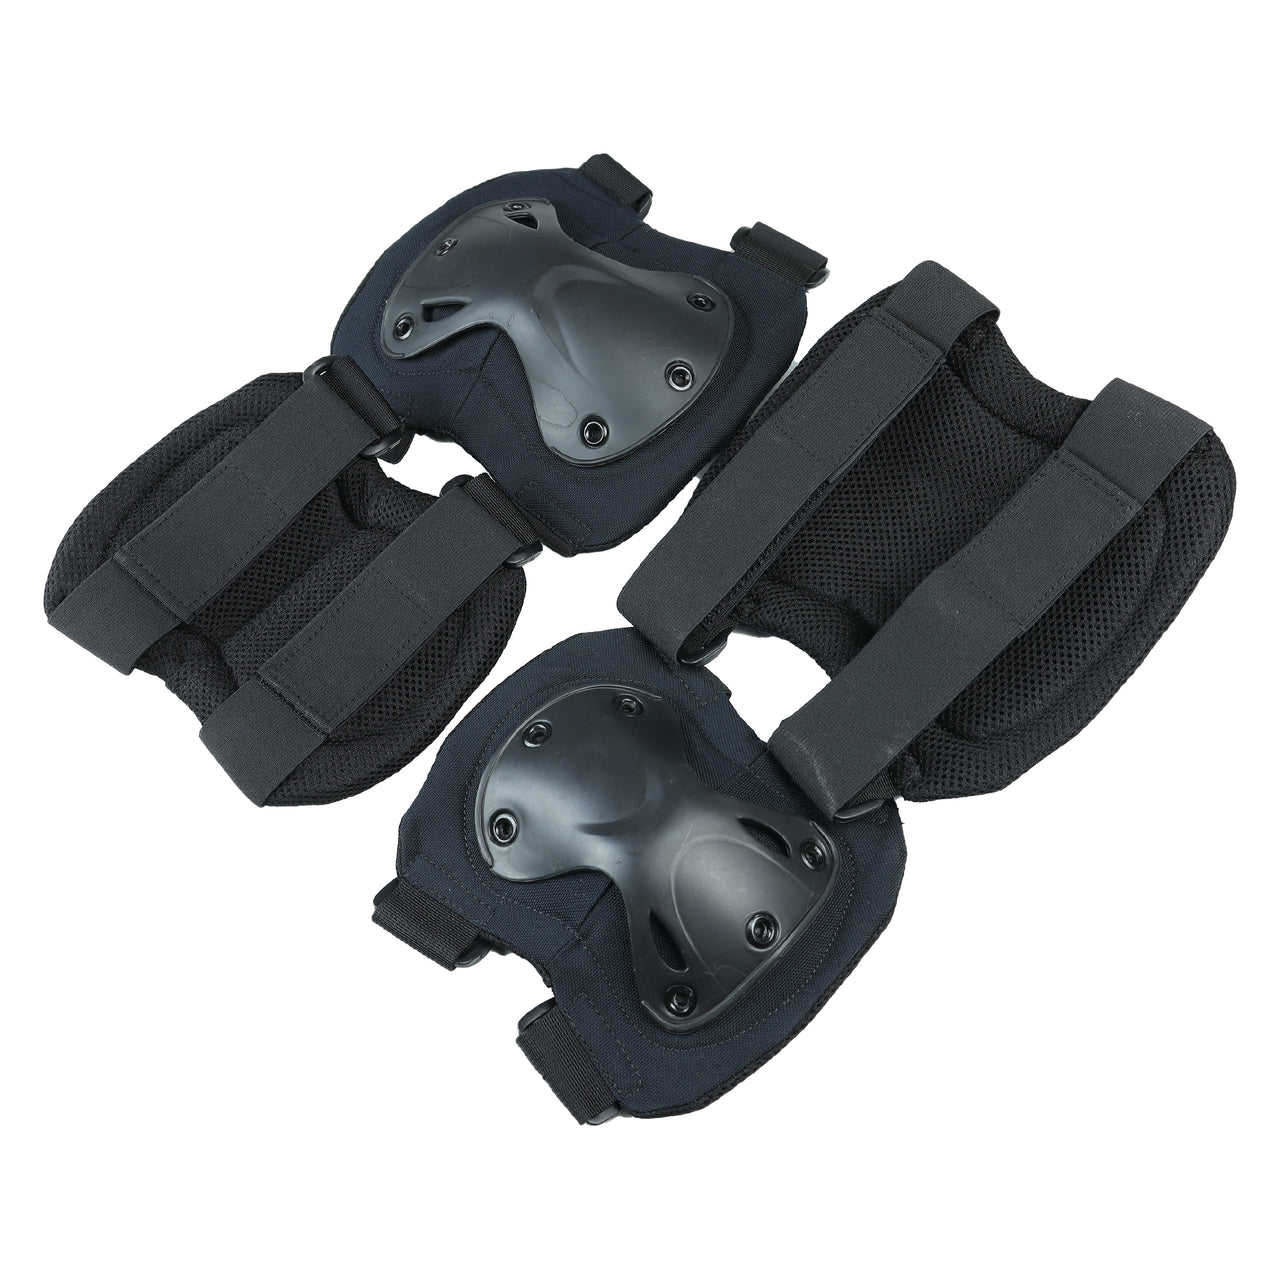 Guard Knee Pads and Elbow Pads Support Protection India